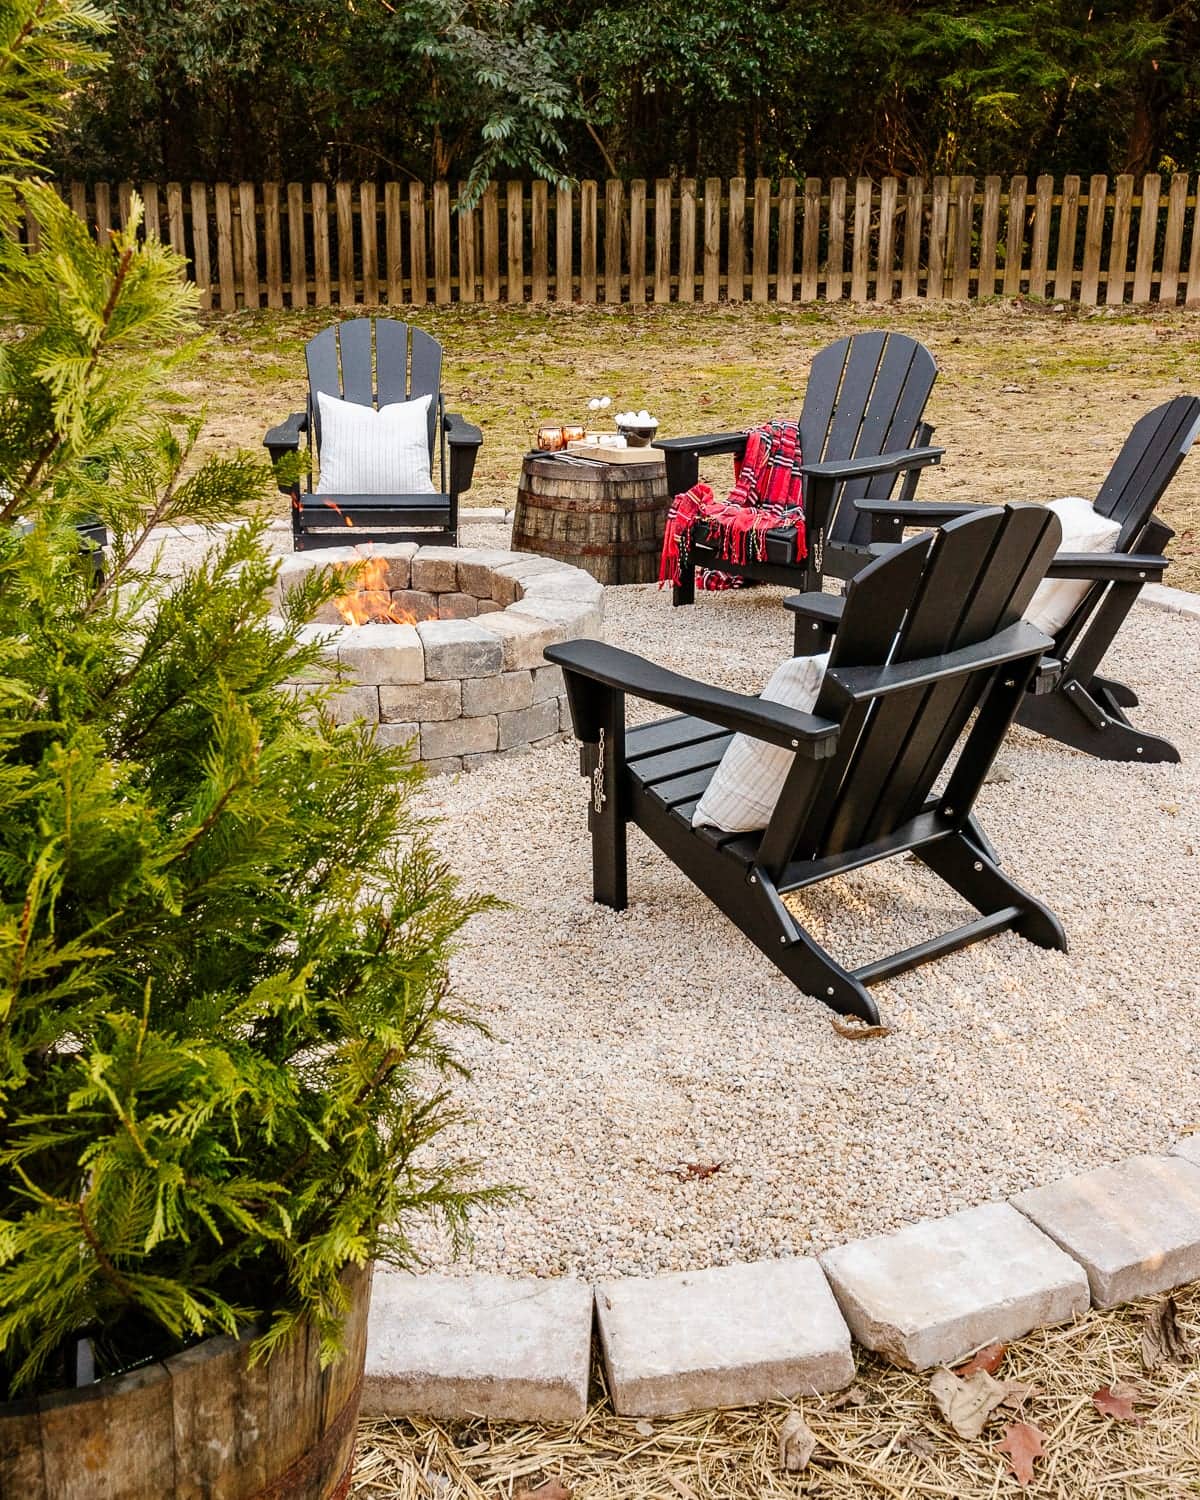 diy backyard fire pit with pea gravel, stone edgers, and adirondack chairs